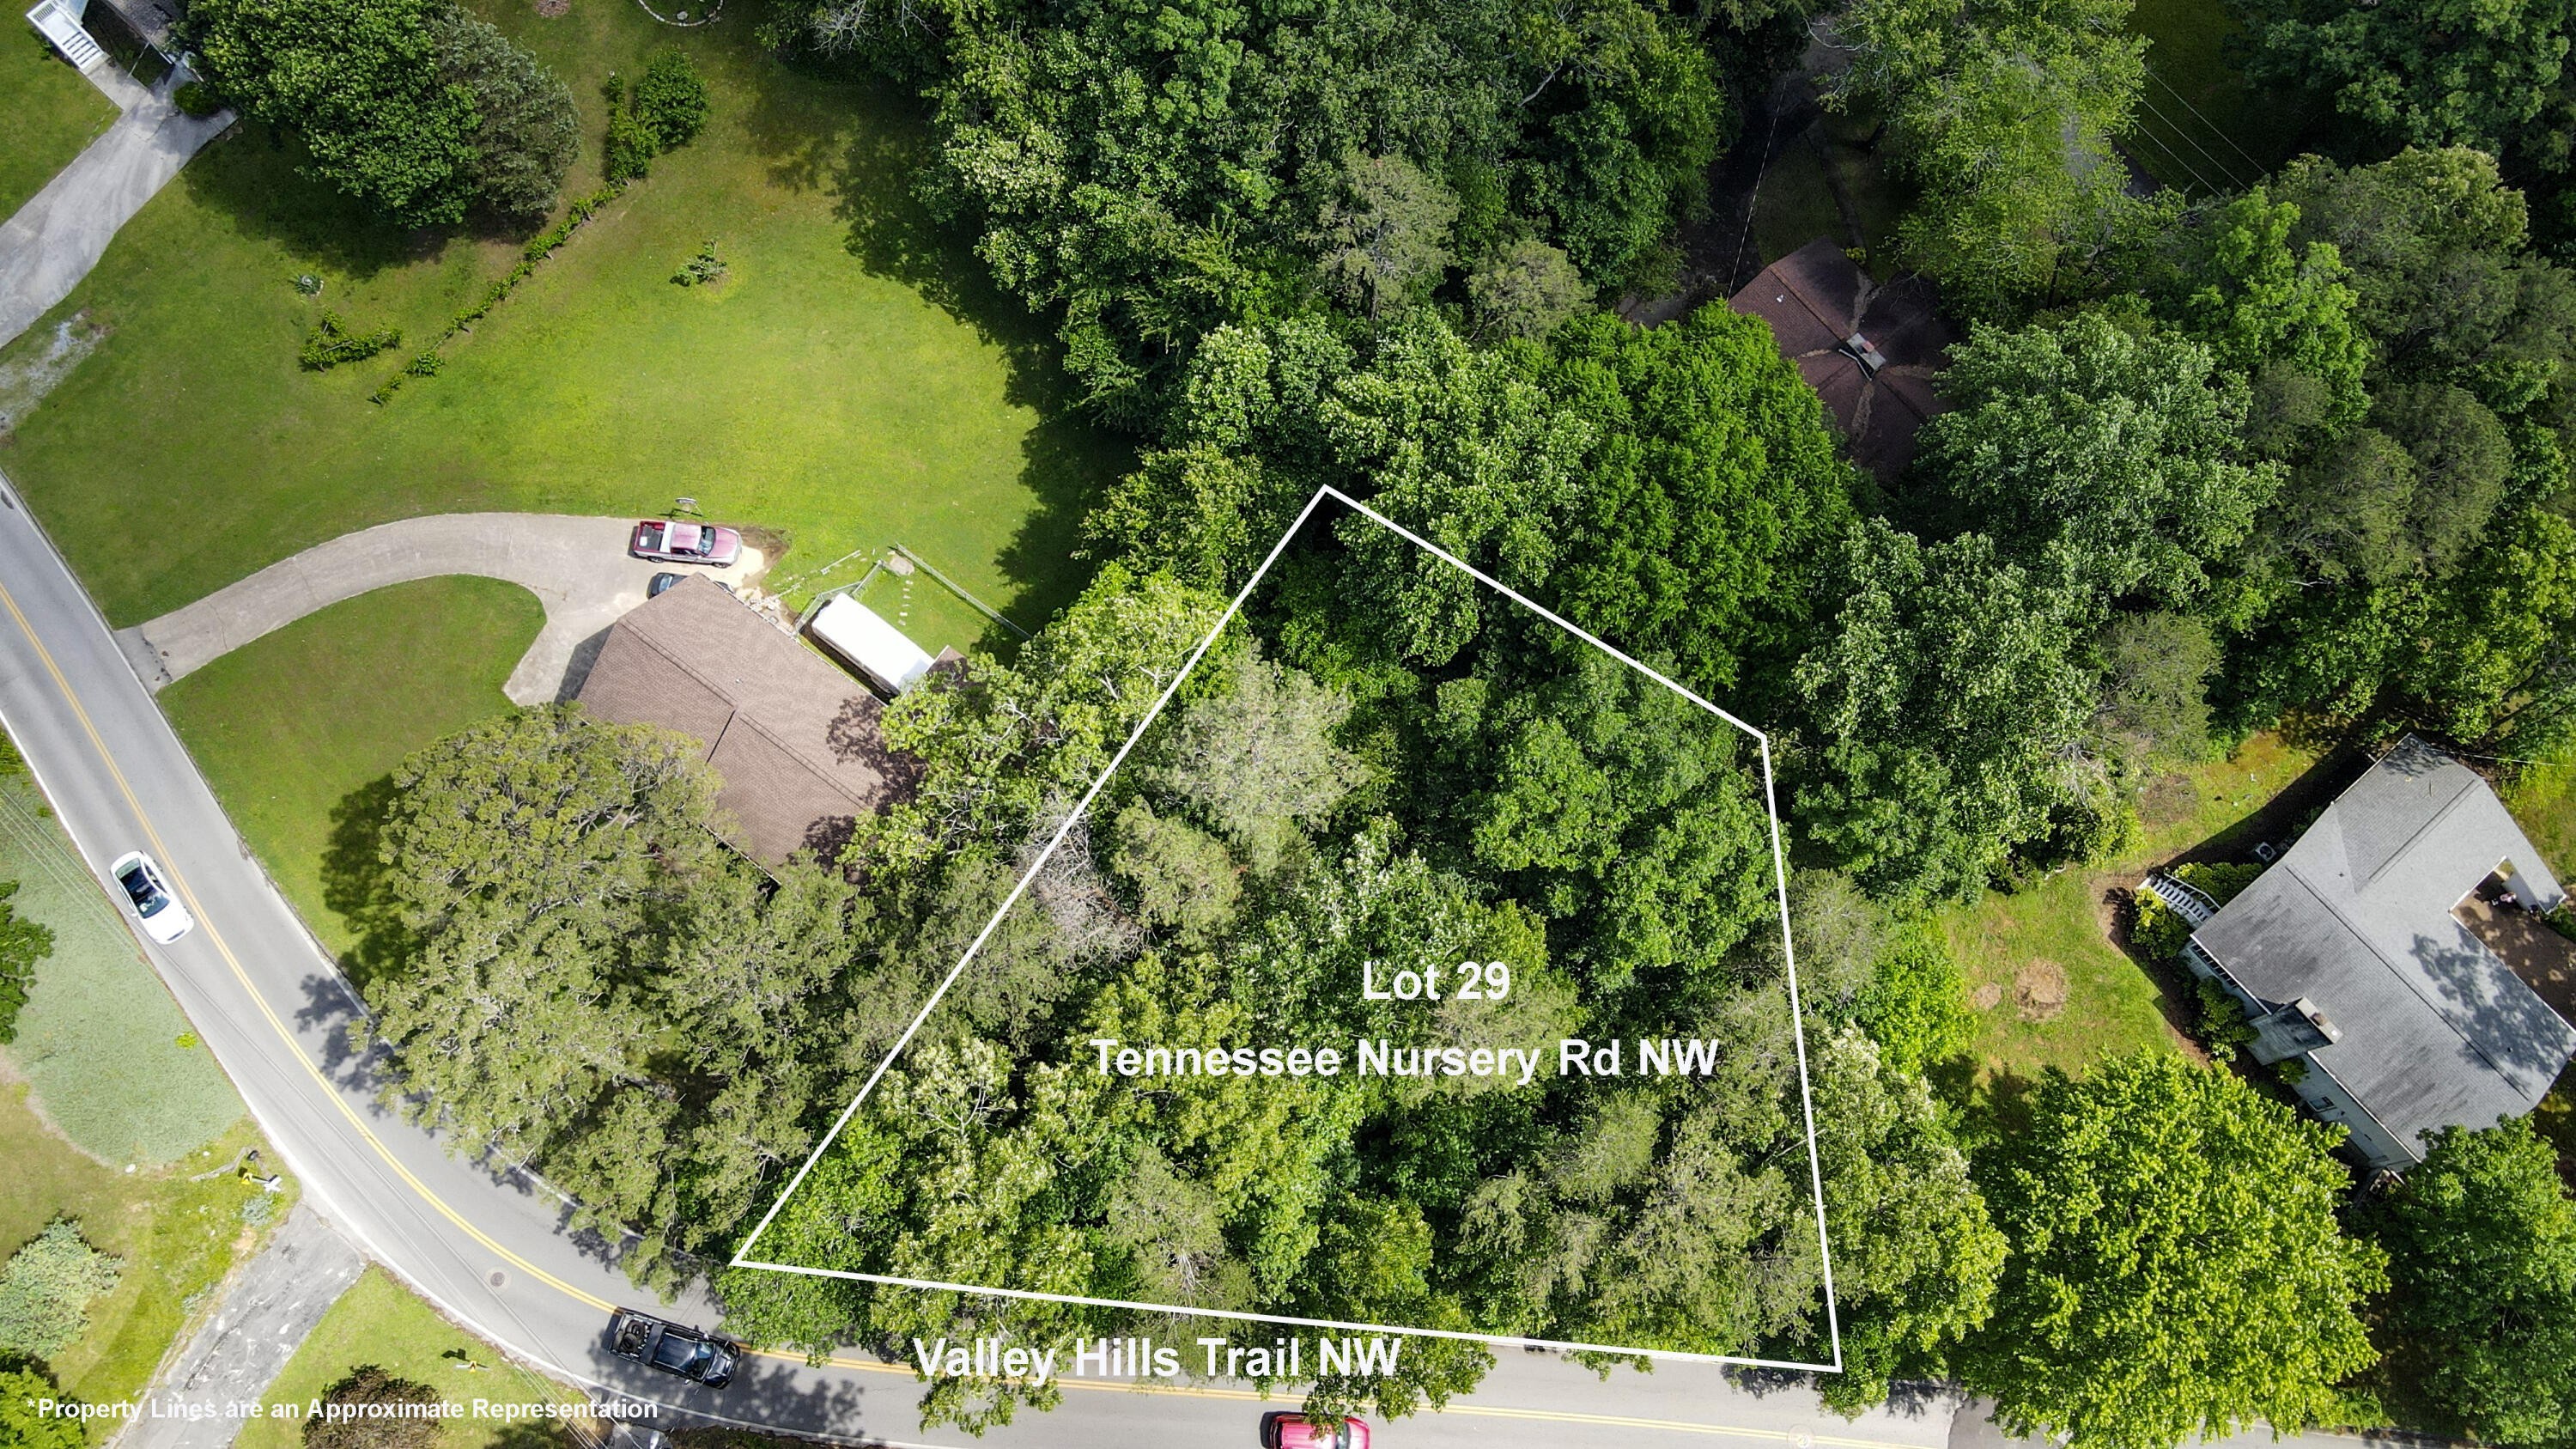 1. Lot 29 Tennessee Nursery Road NW